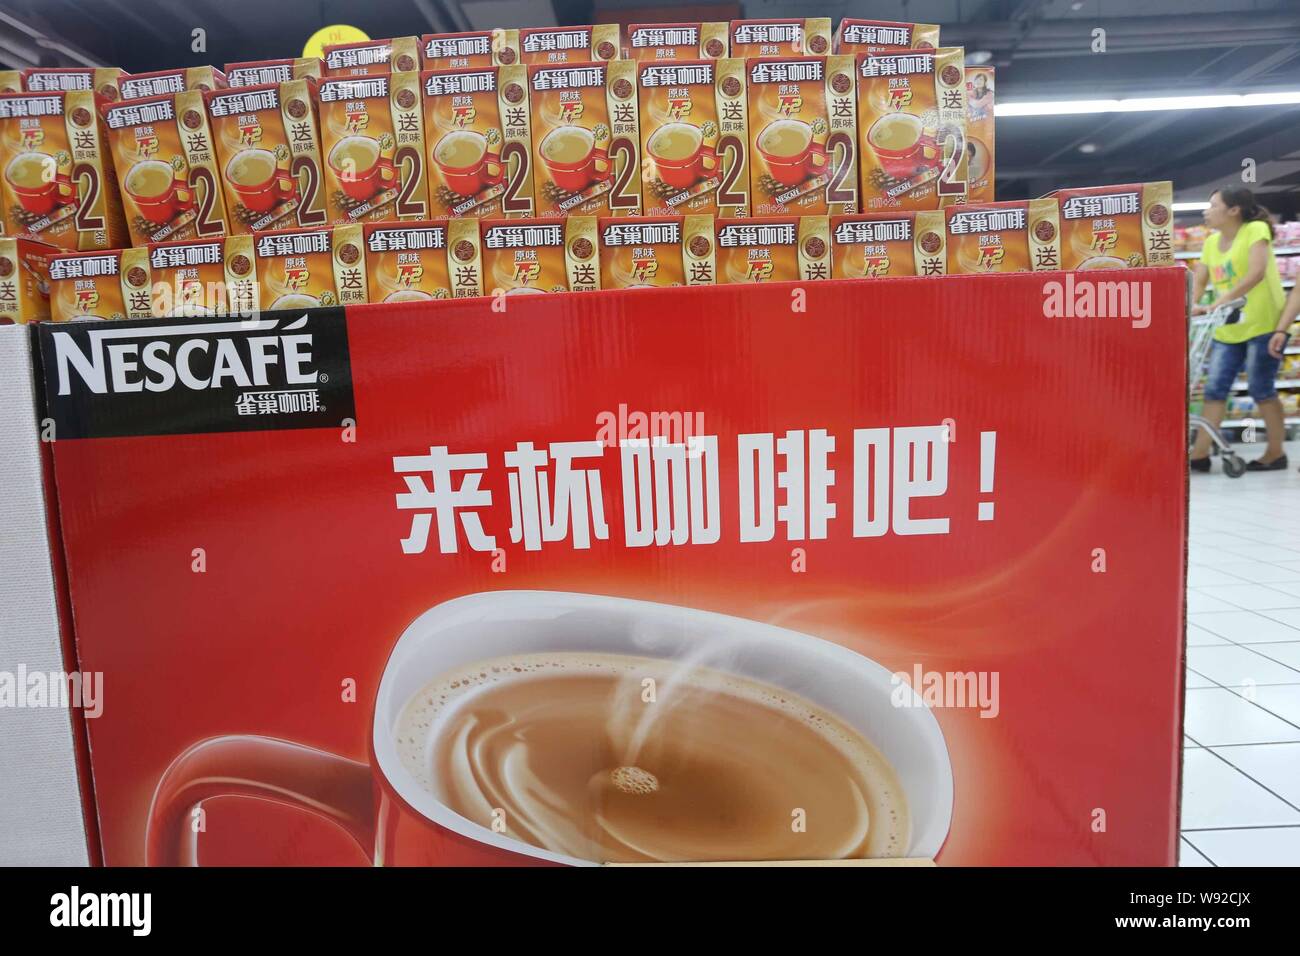 --FILE--Boxes of Nescafe of Nestle are displayed for sale at a supermarket in Xuchang, central Chinas Henan province, 7 July 2013.   Nestle SA, the wo Stock Photo